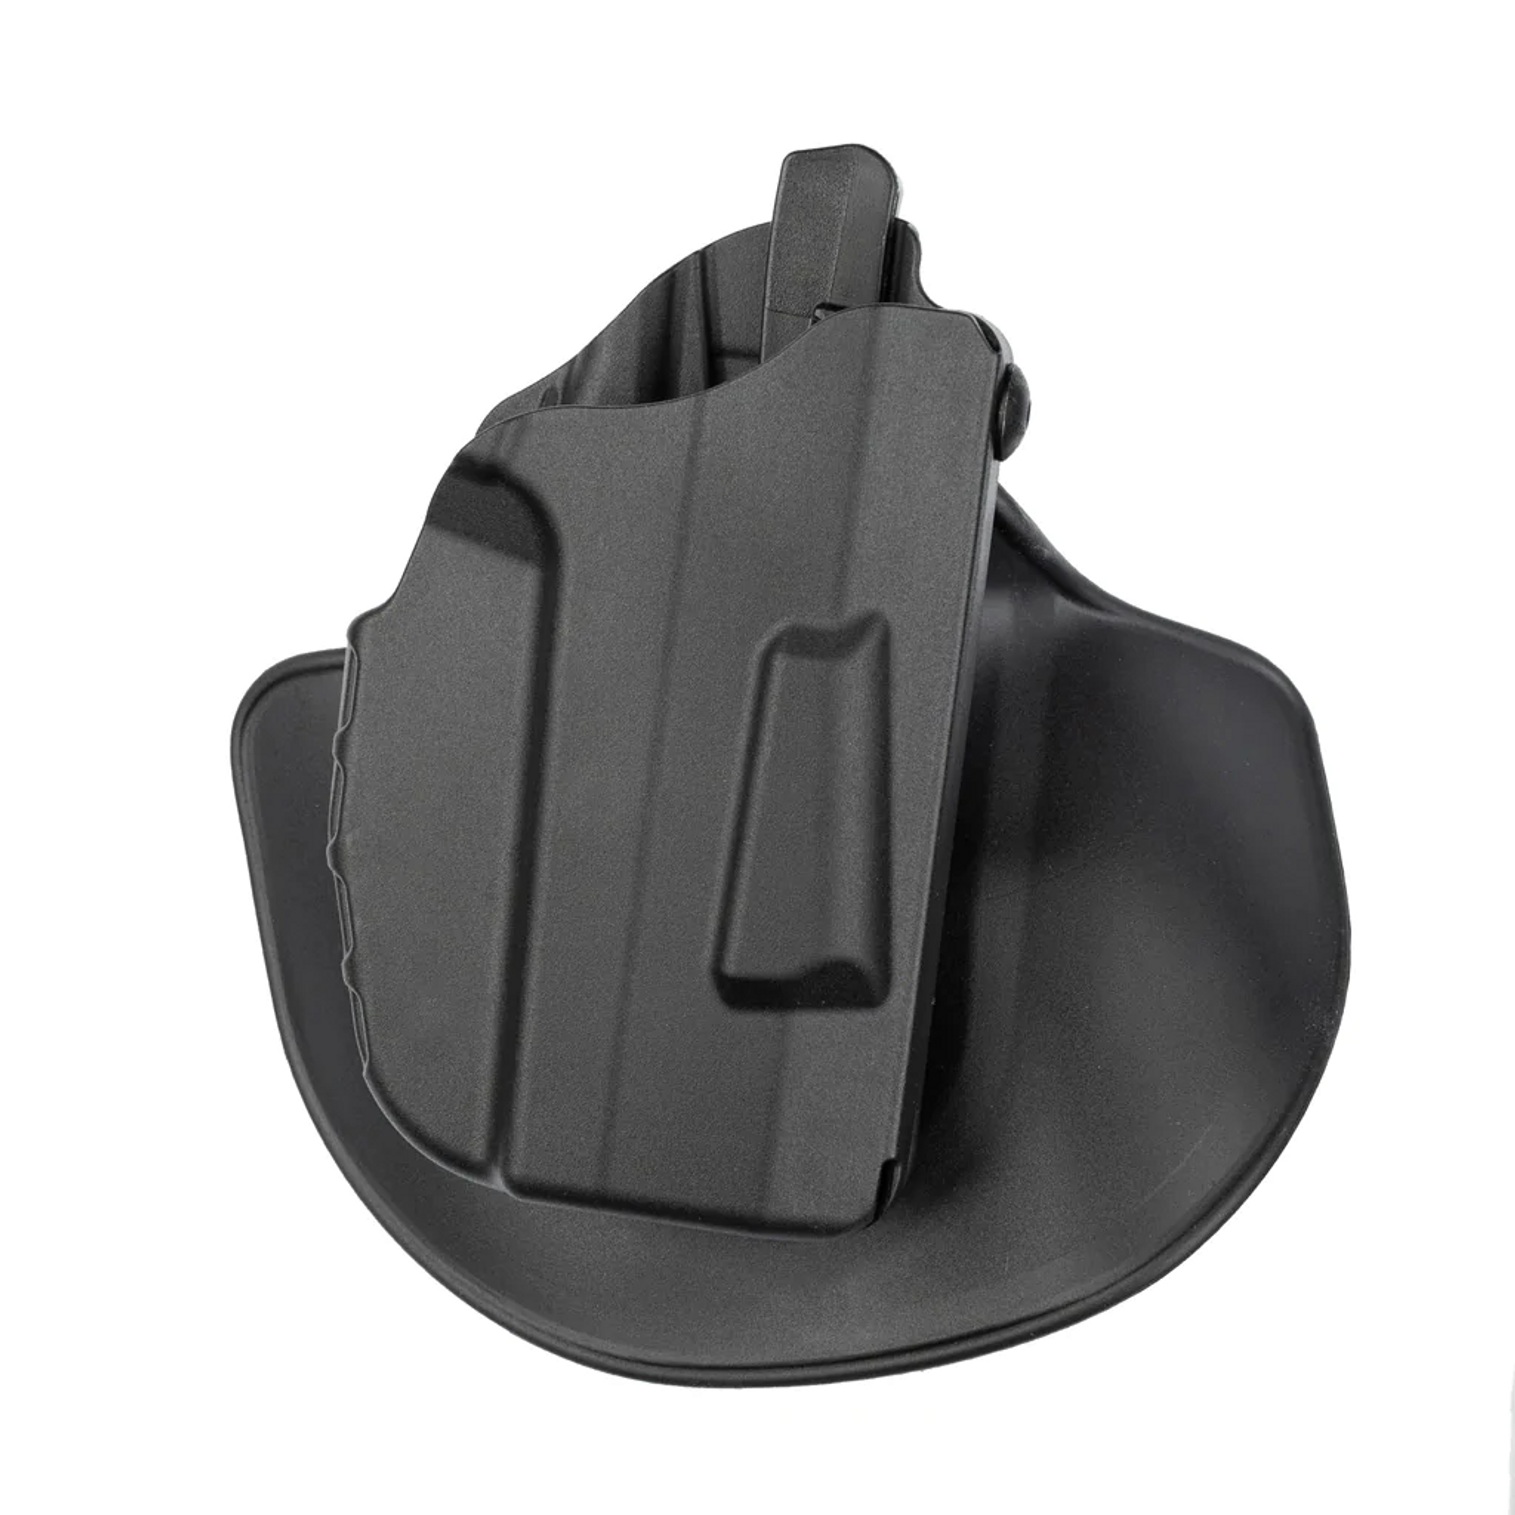 Model 7378 7ts Als Concealment Paddle And Belt Loop Combo Holster For Glock 19 W/ Light - KR7378-28325-412